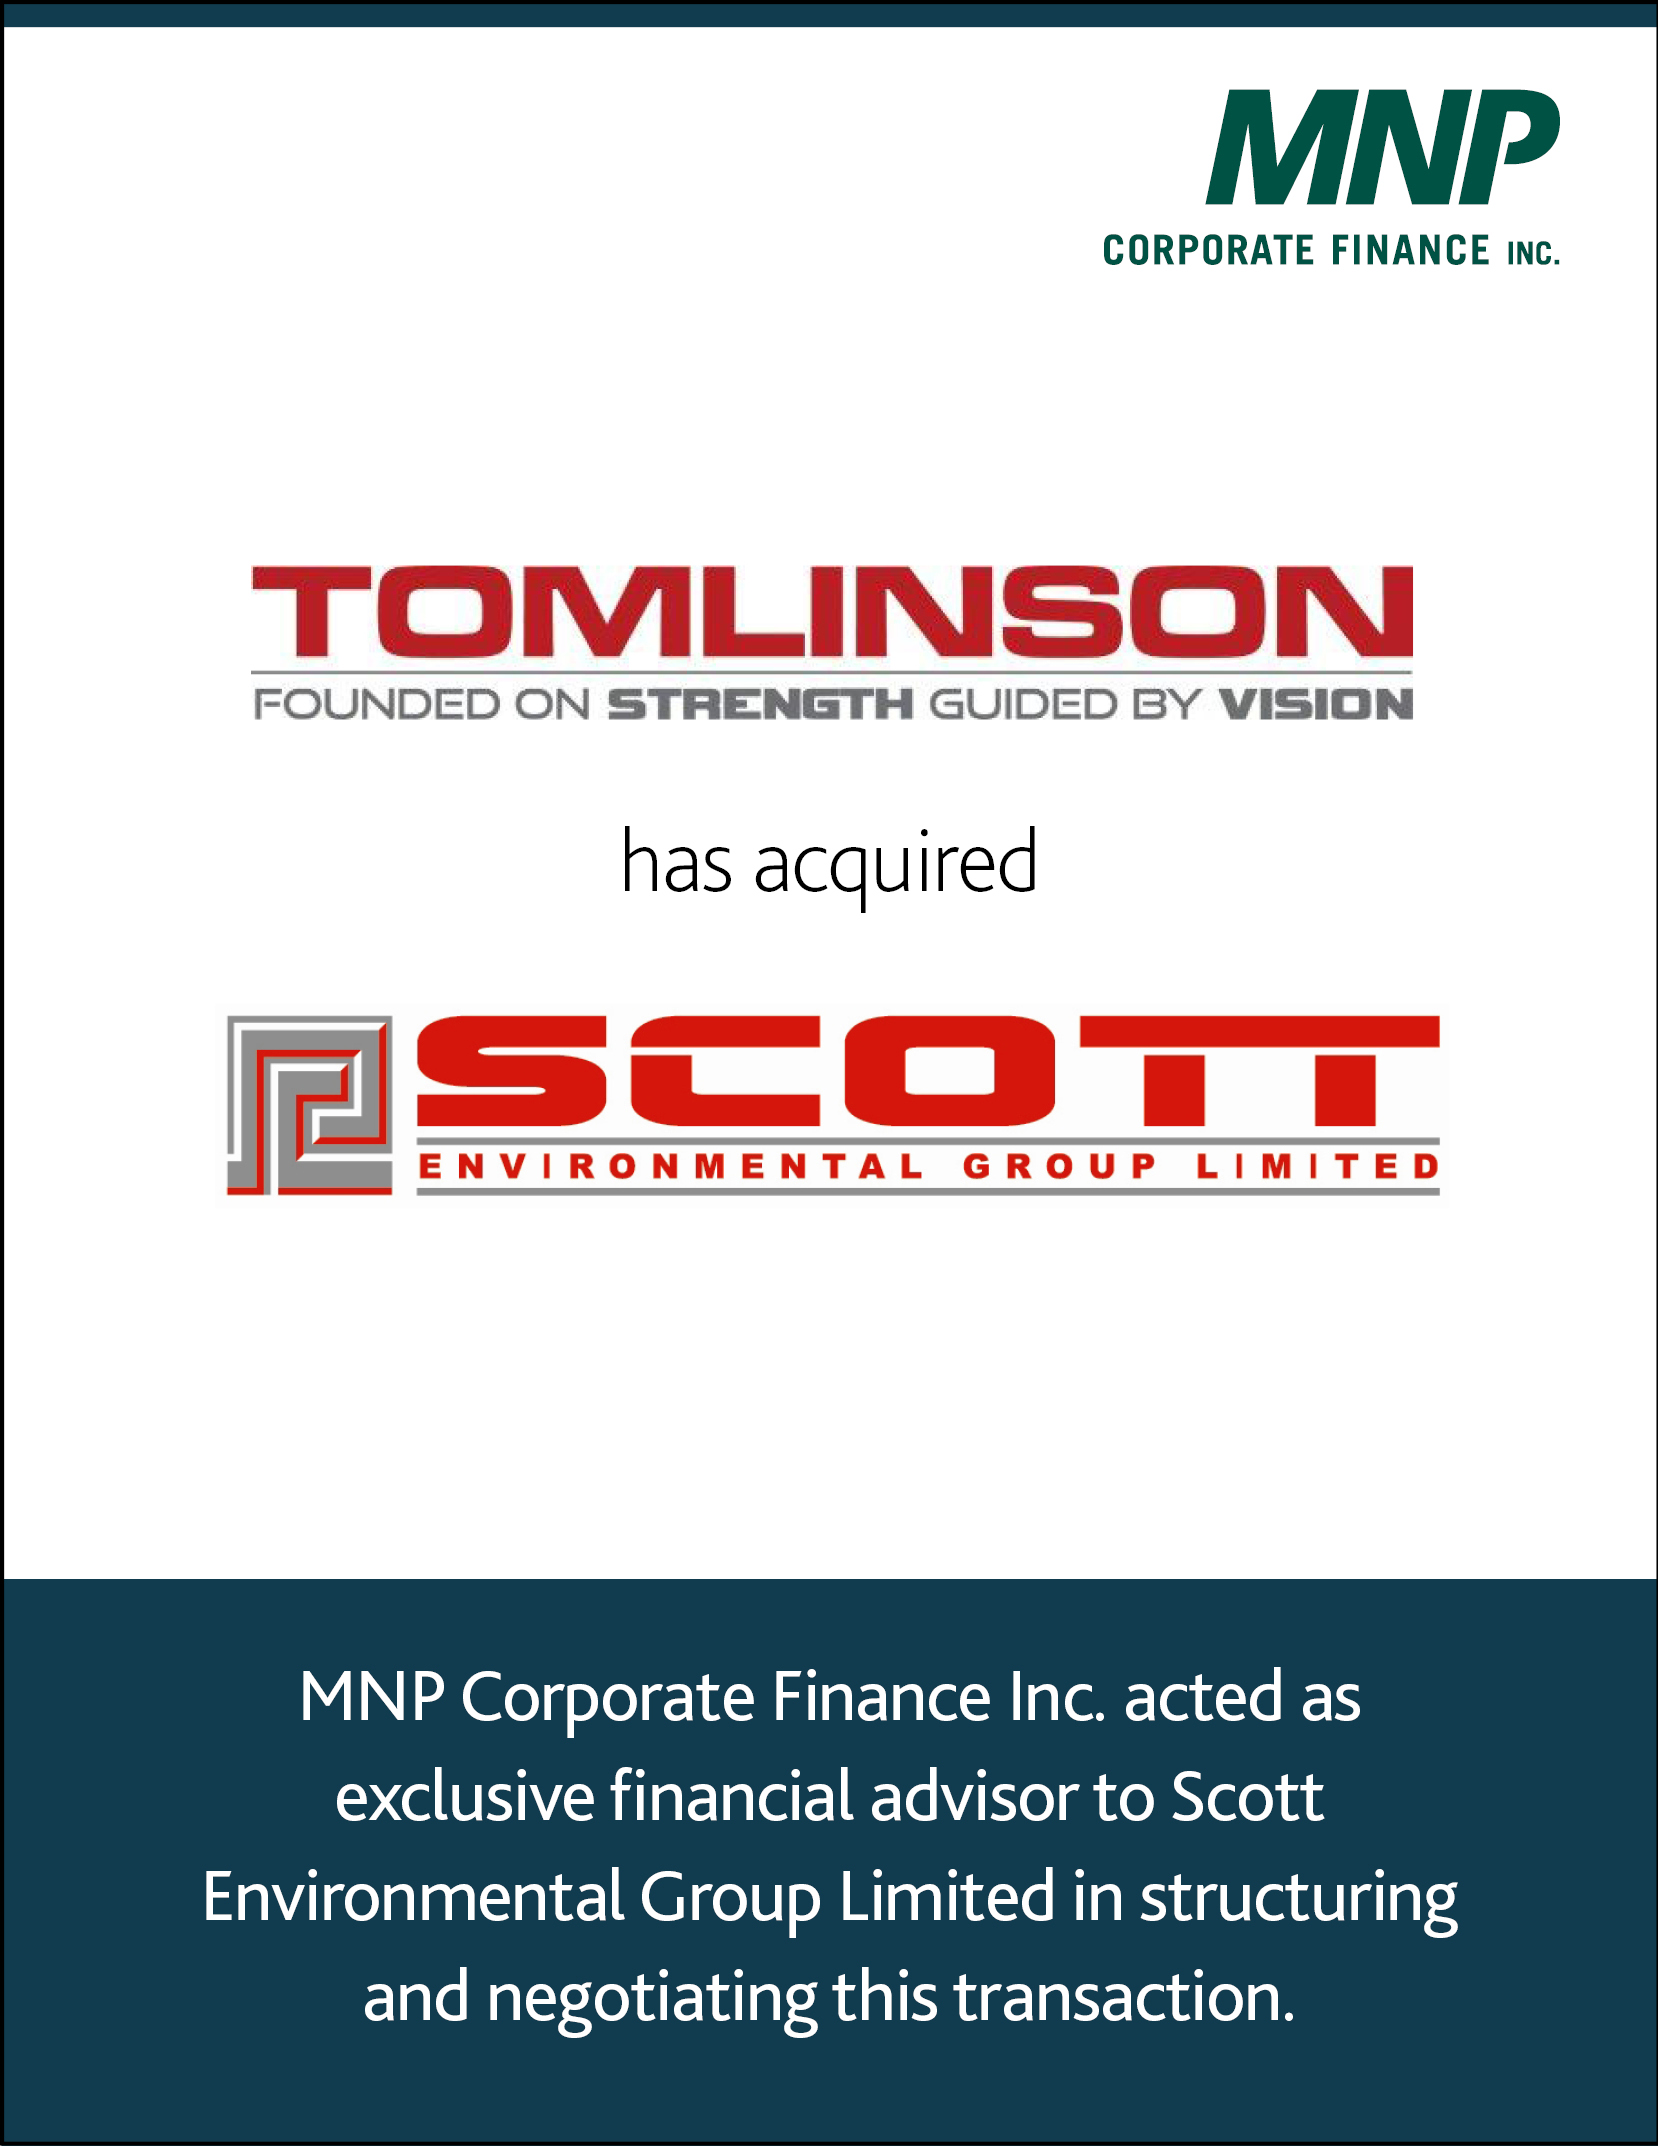 Tomlinson has acquired Scott Environmental Group